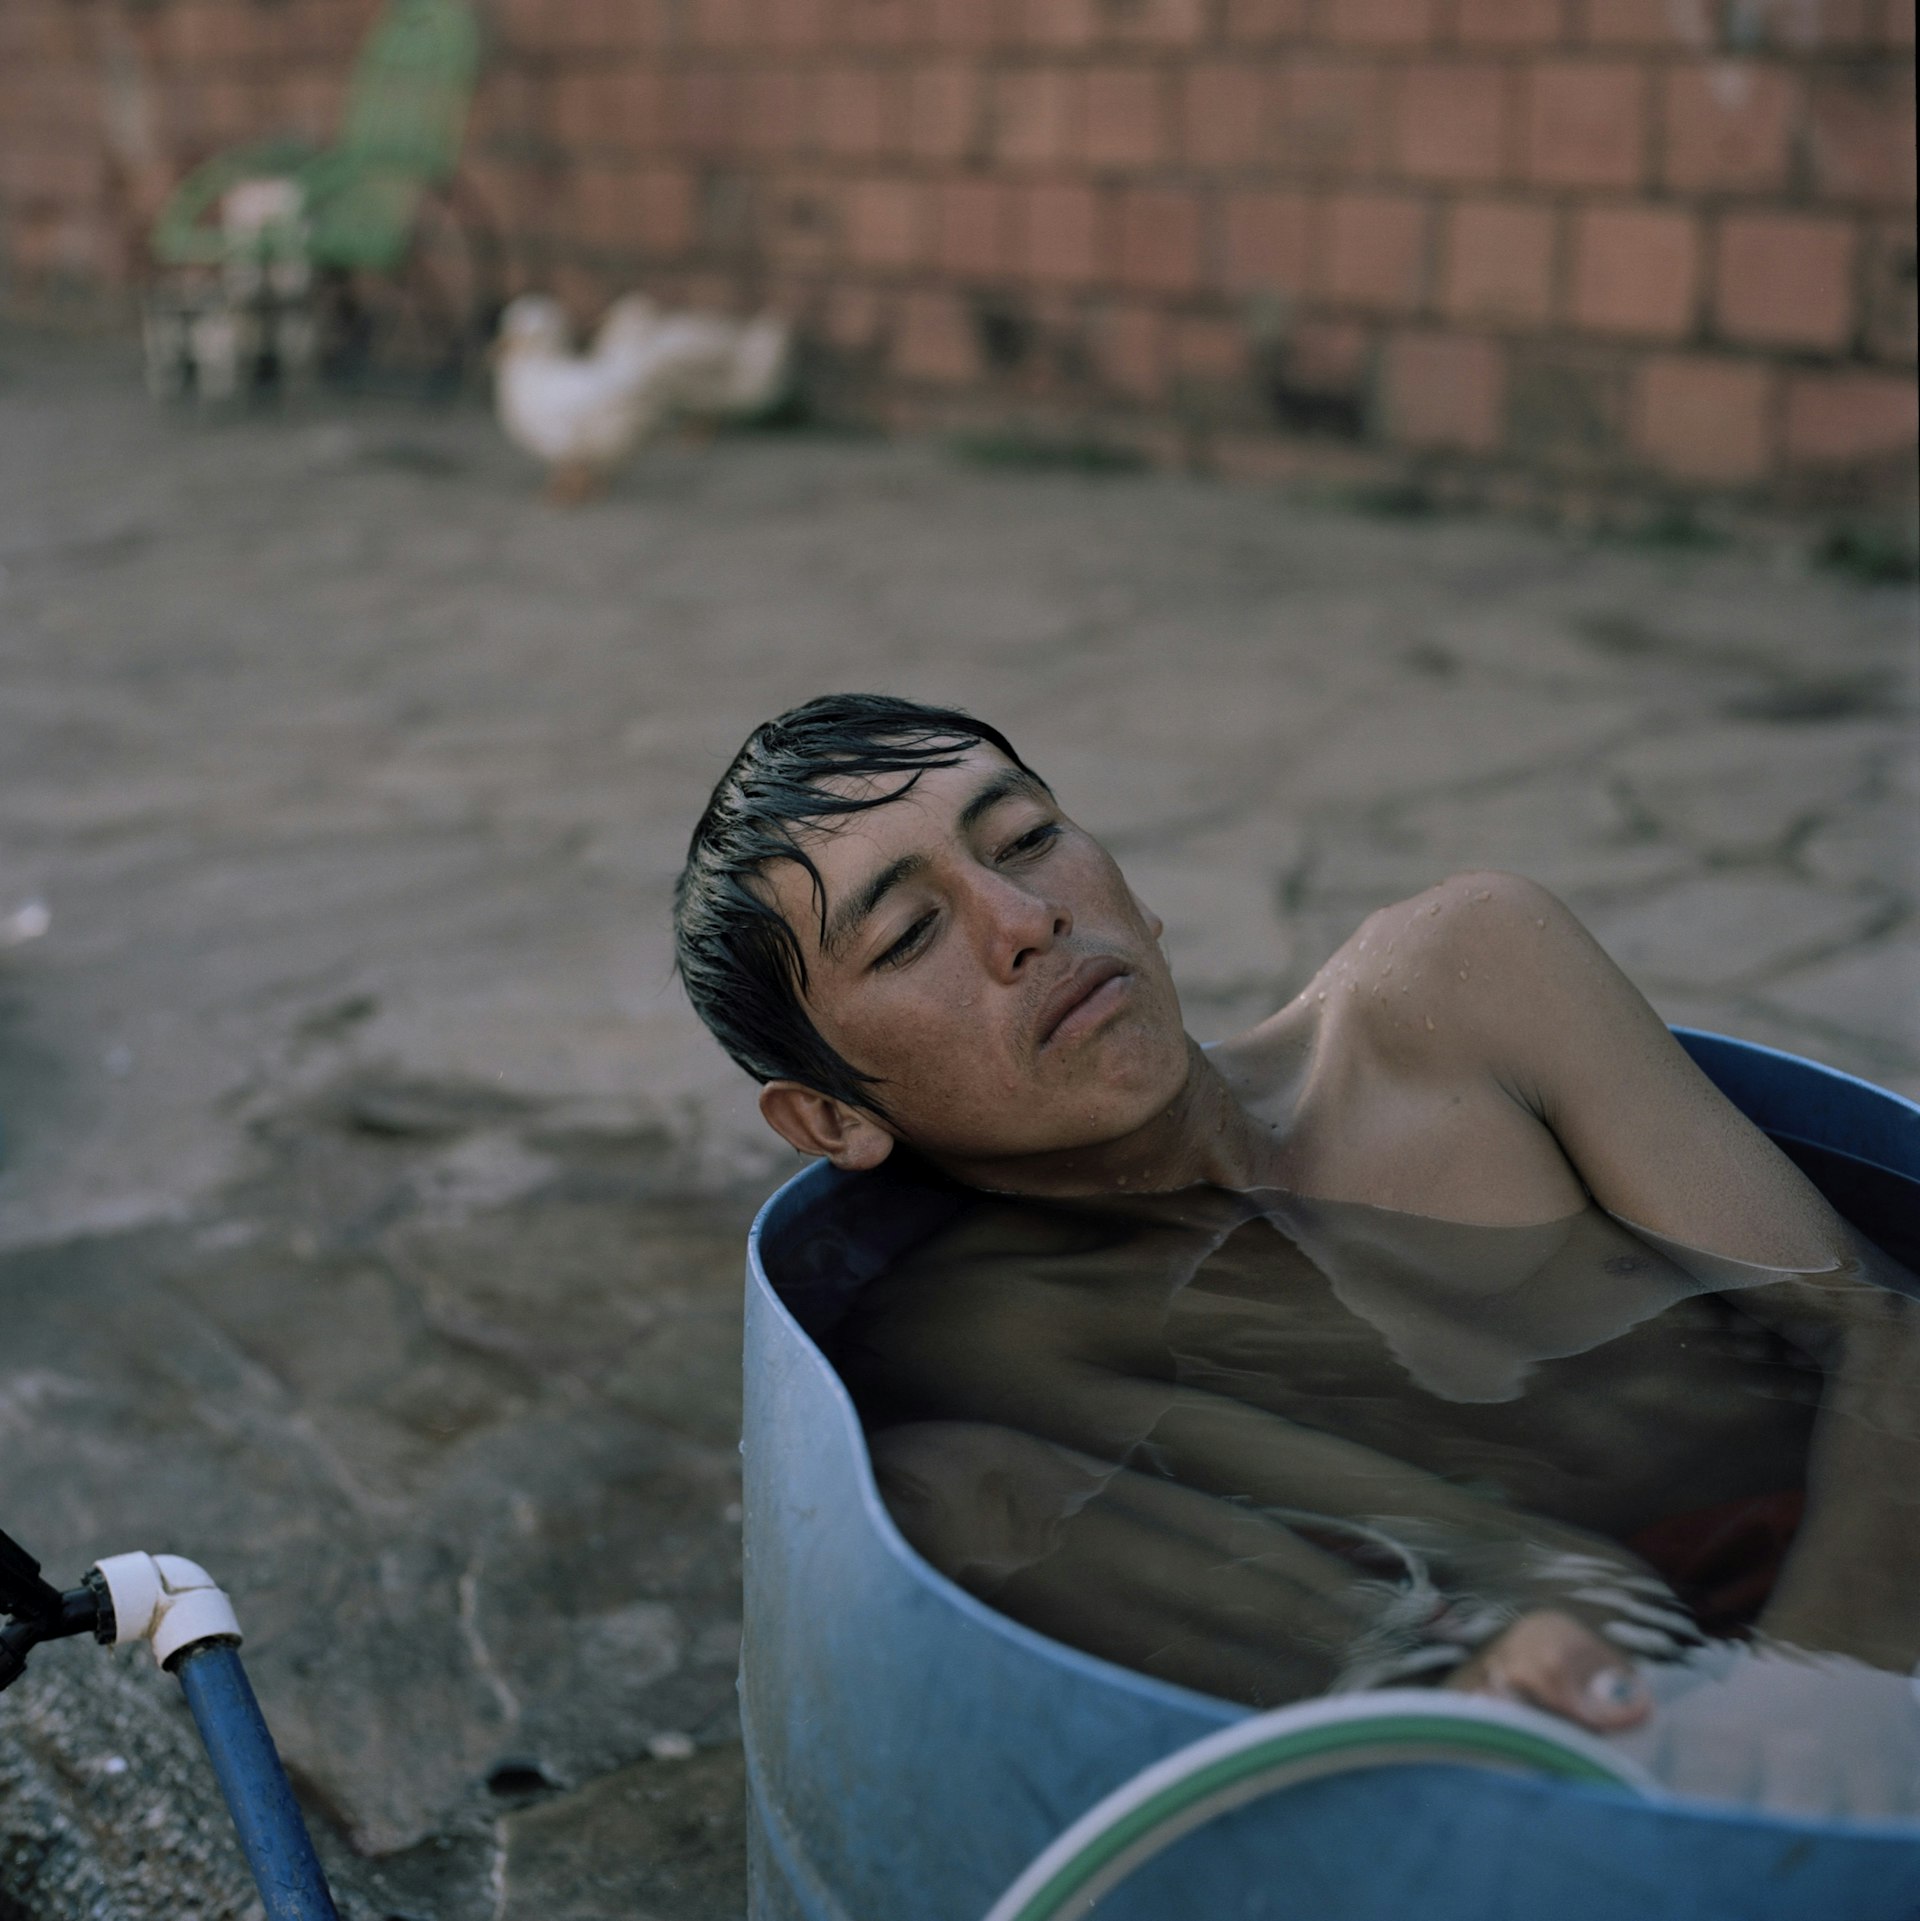 Juan Ramón, 16, takes a bath on a barrel in front of their makeshift home in the streets of Asunción where he has been for eight months together with his family. They were living in the “bañado”, the area surrounding the river until recent floods resulting from El Niño, as well as deforestation due to agribusiness further up the river forced them to evacuate. The bañados have been gradually populated with newcomers on the city, coming from rural areas and with poor perspectives.